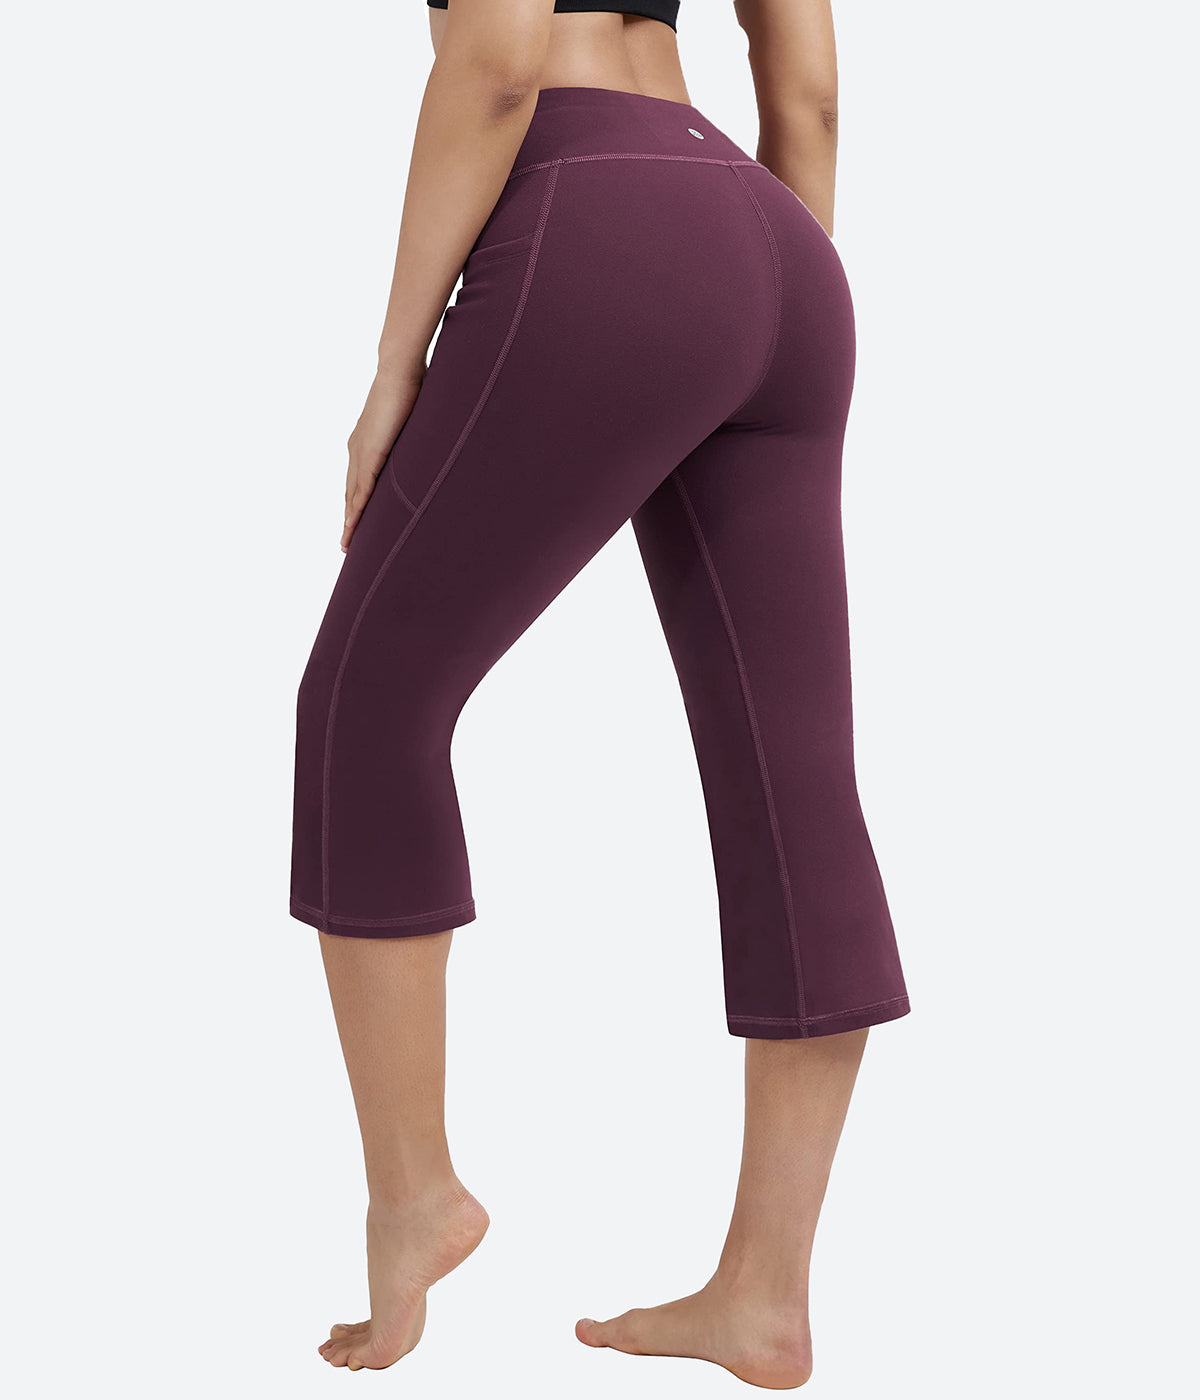 Womens High Waisted Heathyoga Bootcut Bootcut Yoga Pants With Pockets  Perfect For Yoga, Workout, And Bootleg Workouts From Zizii, $13.84